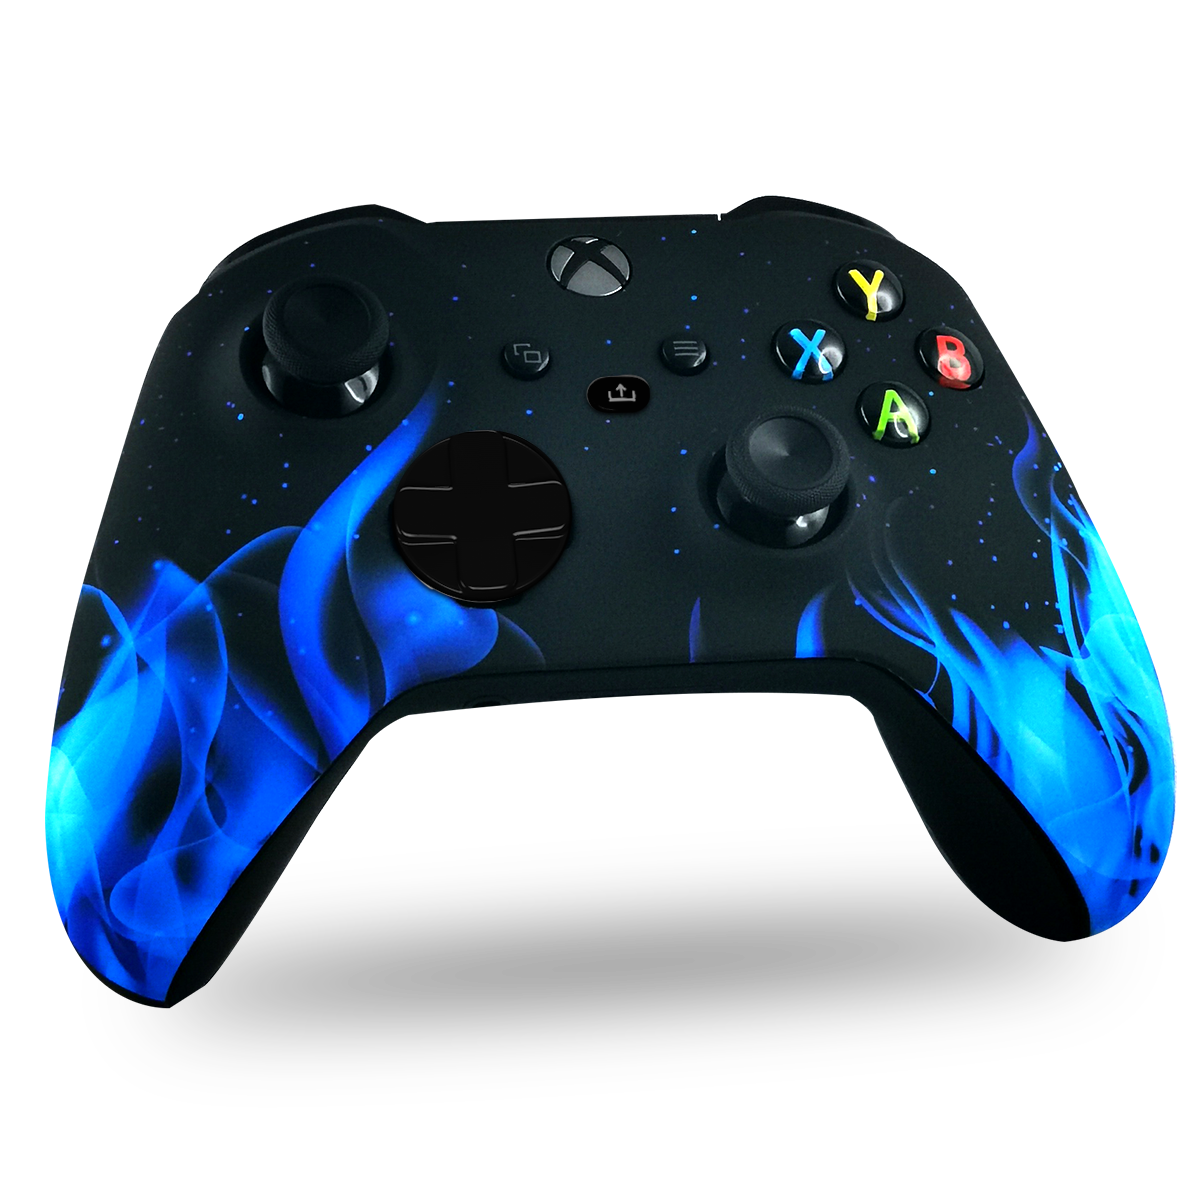 manette-xbox-series-x-custom-blue-fire-manette-personnalisee-xbox-series-s-draw-my-pad